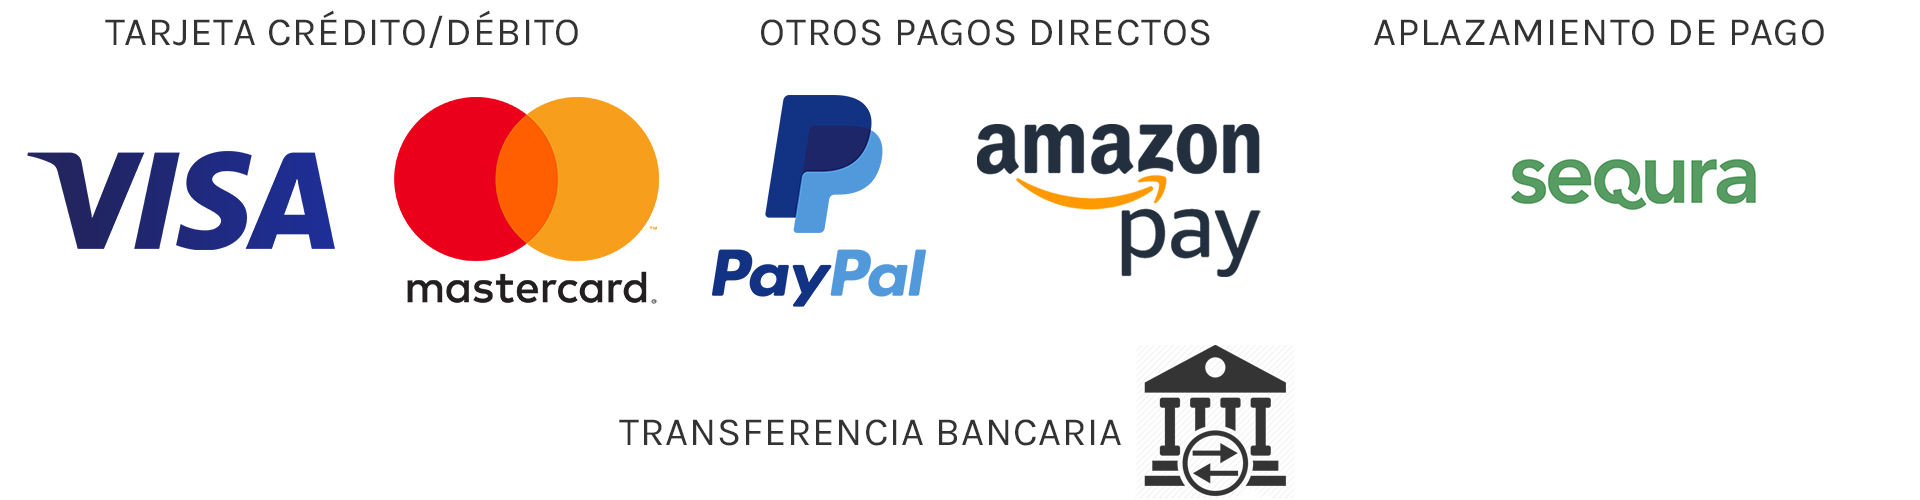 Payments